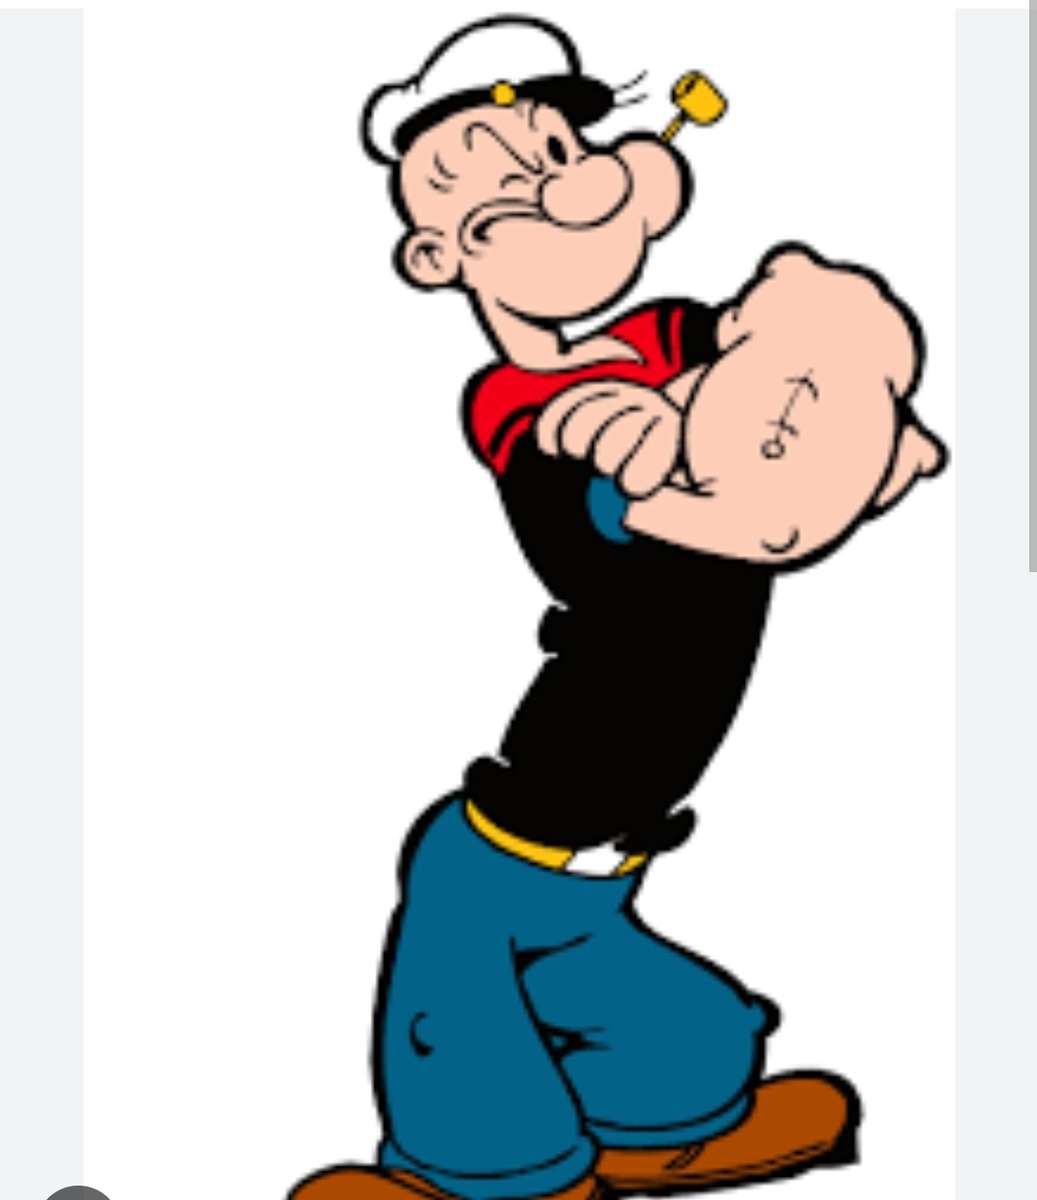 Popeye the sailor man puzzle online from photo